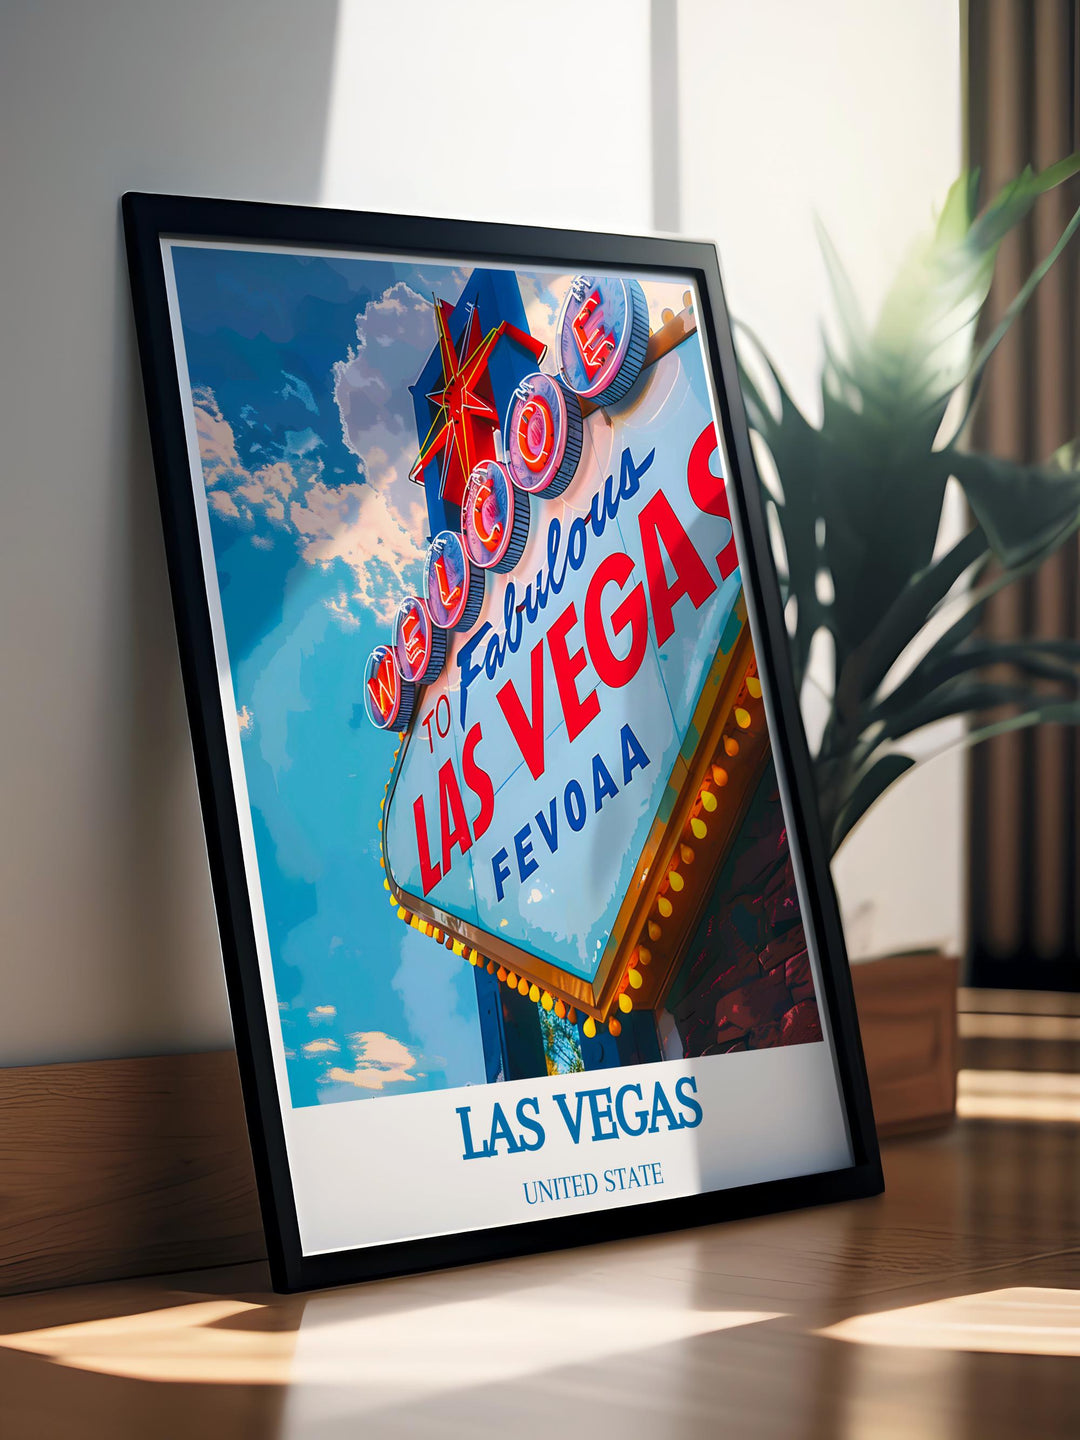 USA travel poster featuring Las Vegas, encouraging exploration and adventure across the nation.